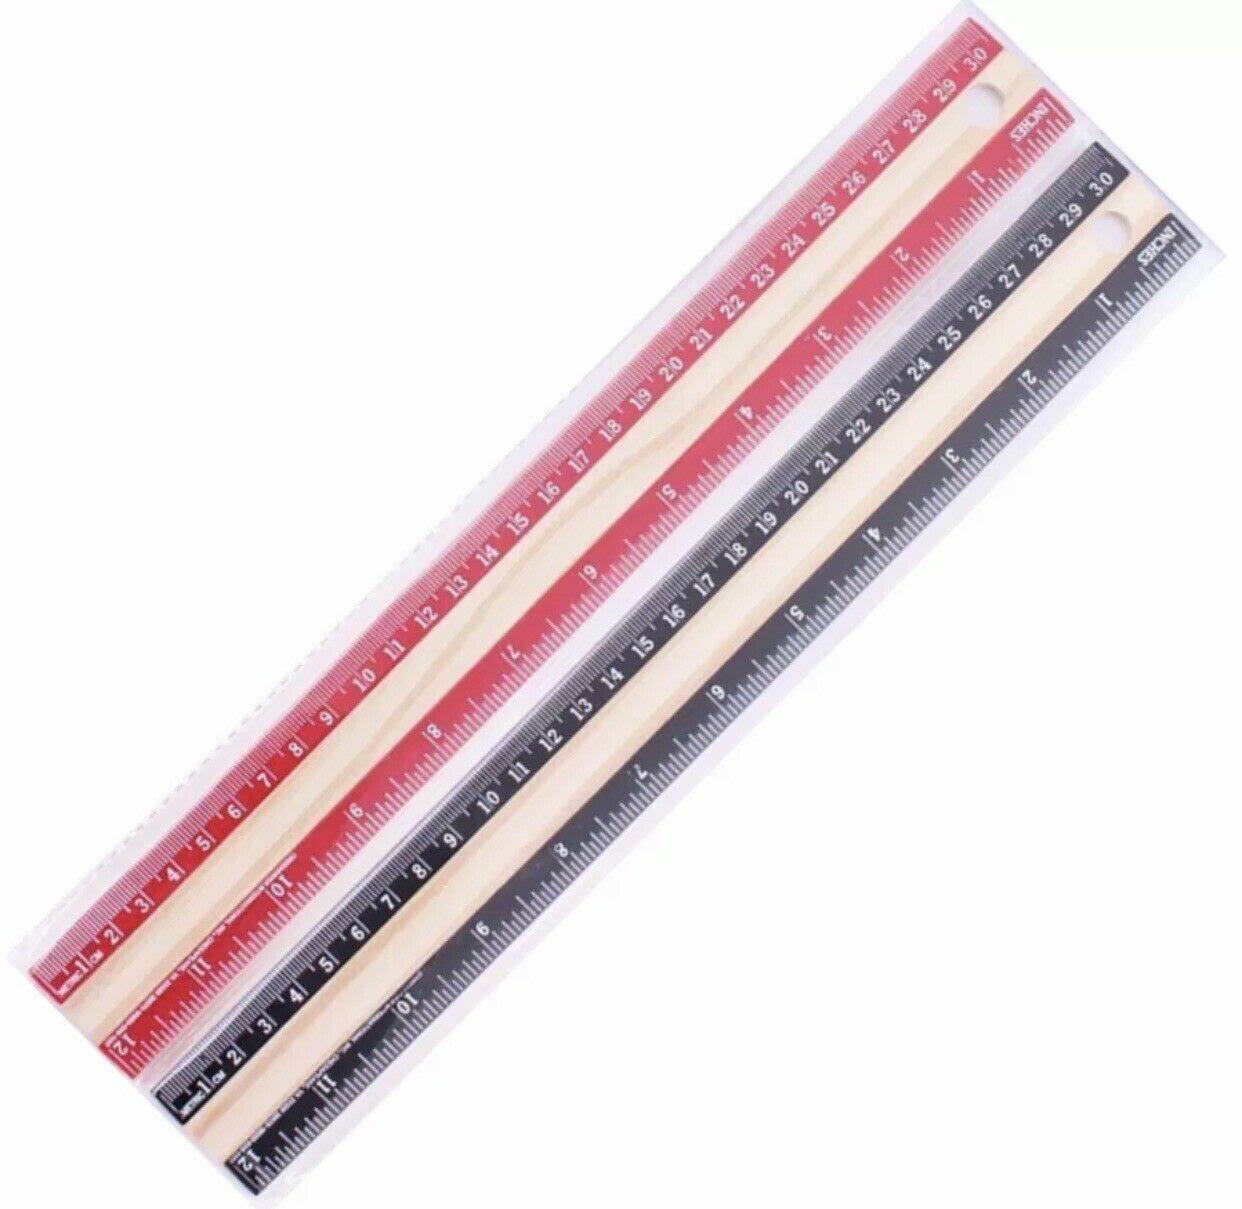 Wooden Rulers - 30cm / 12in Ruler - Pack of 2